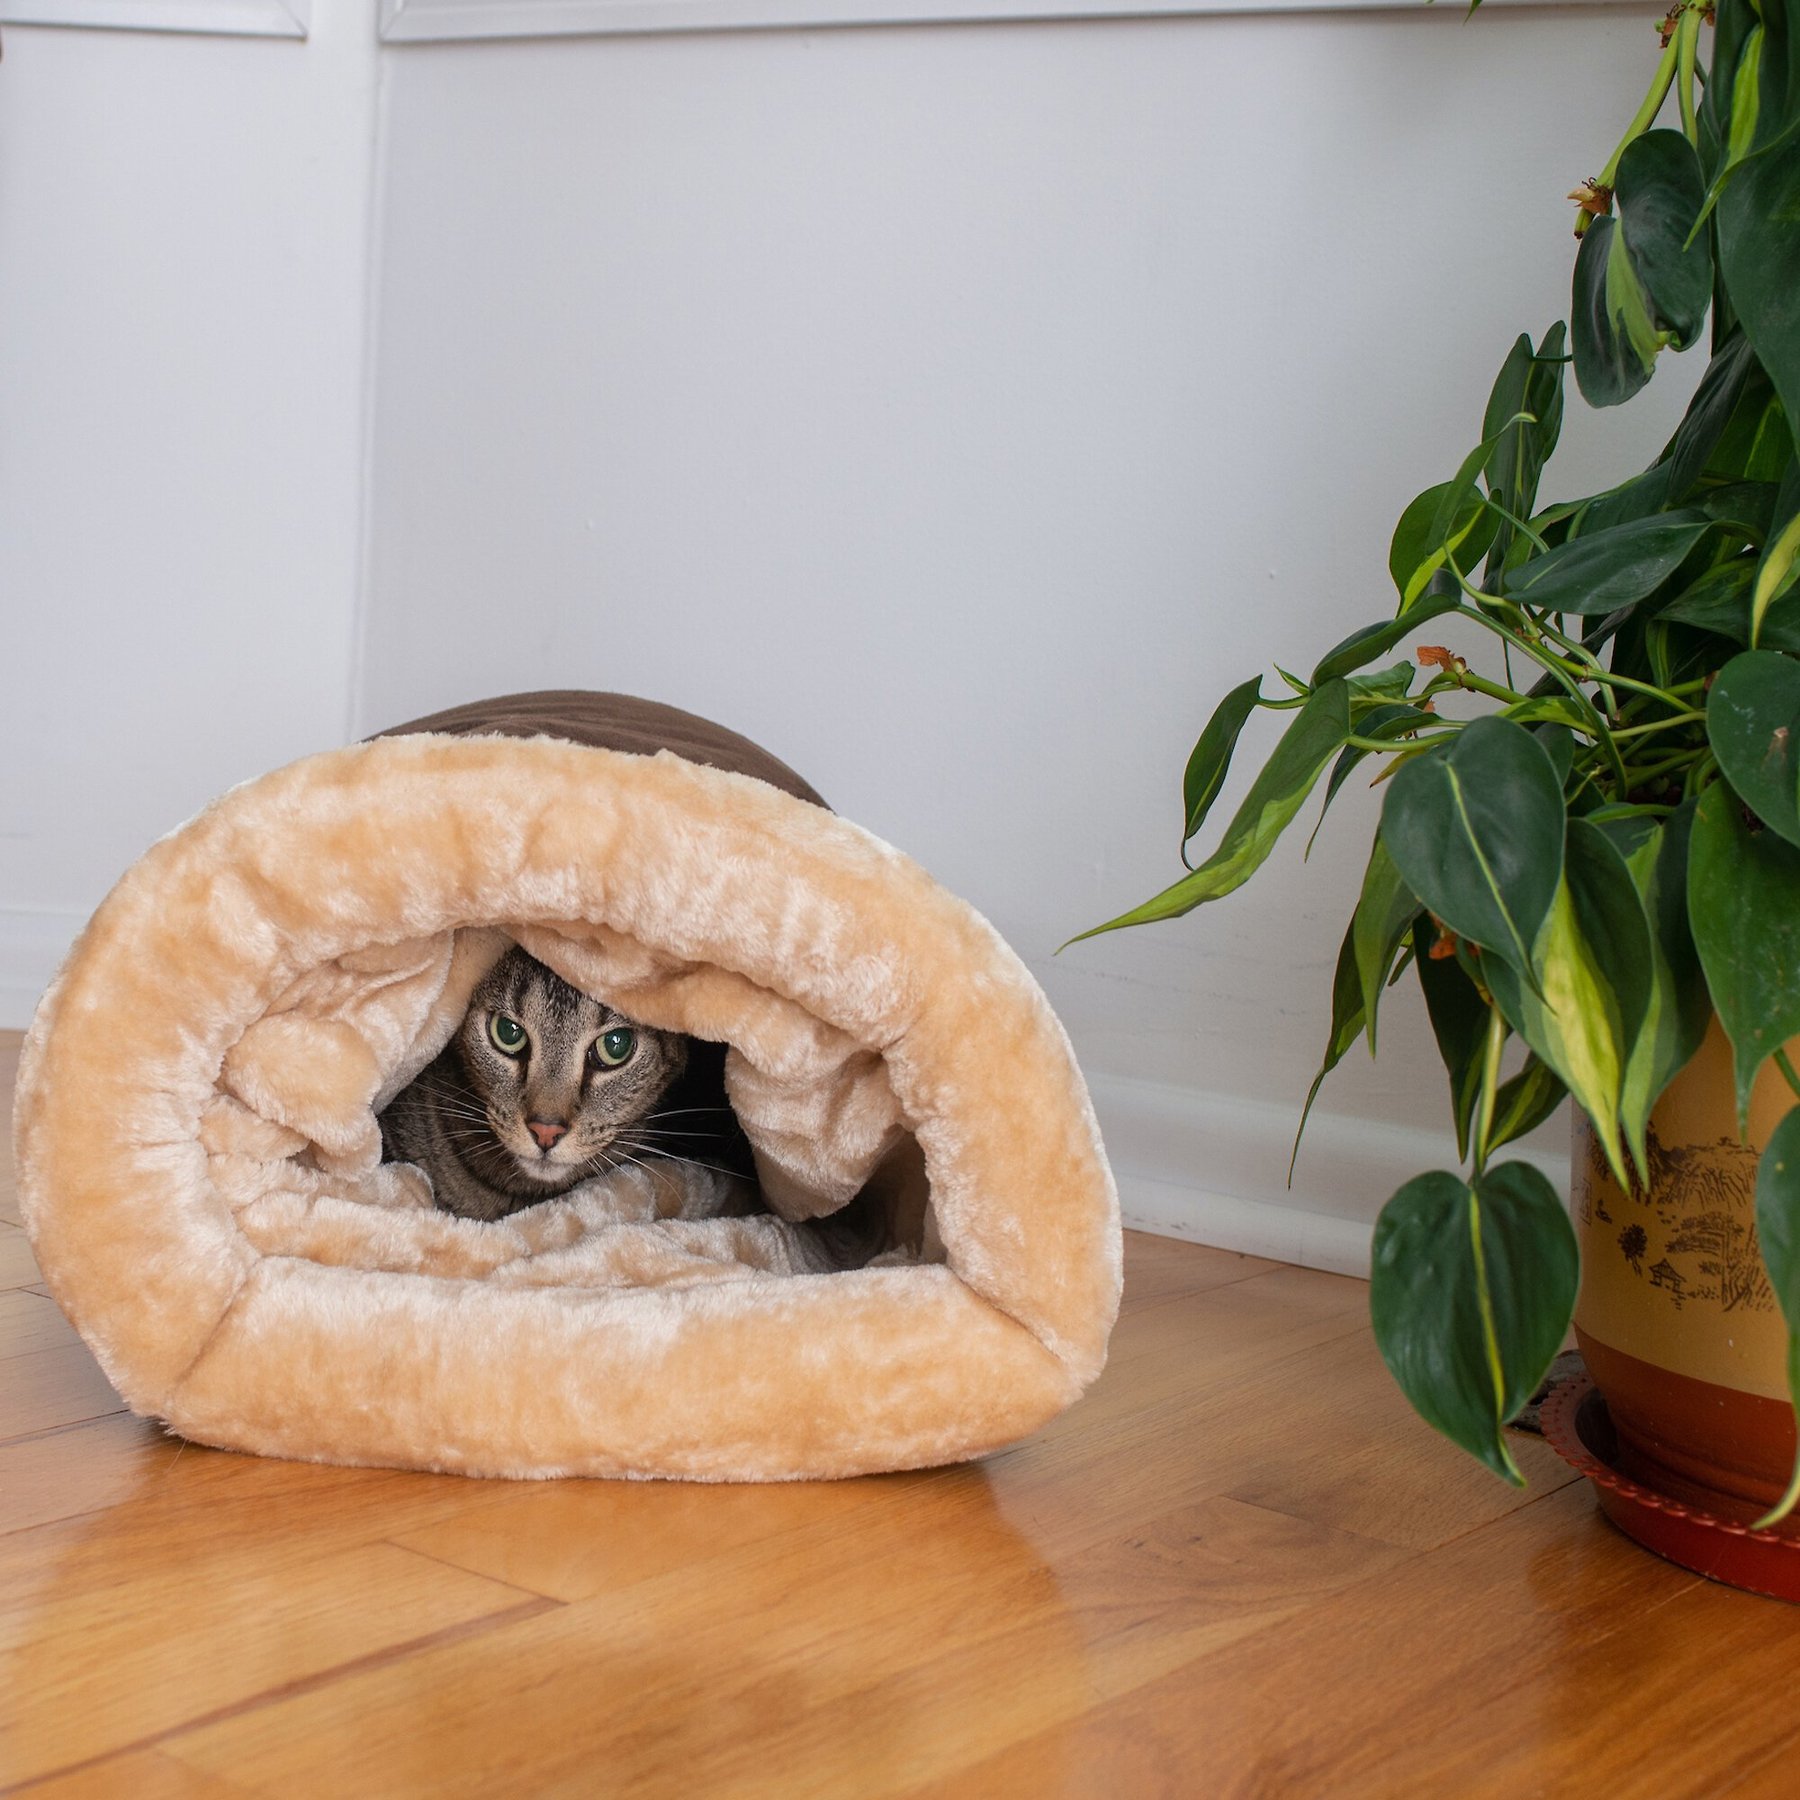 Cute print! Home made sturdy cat beds-machine washable and cats love them